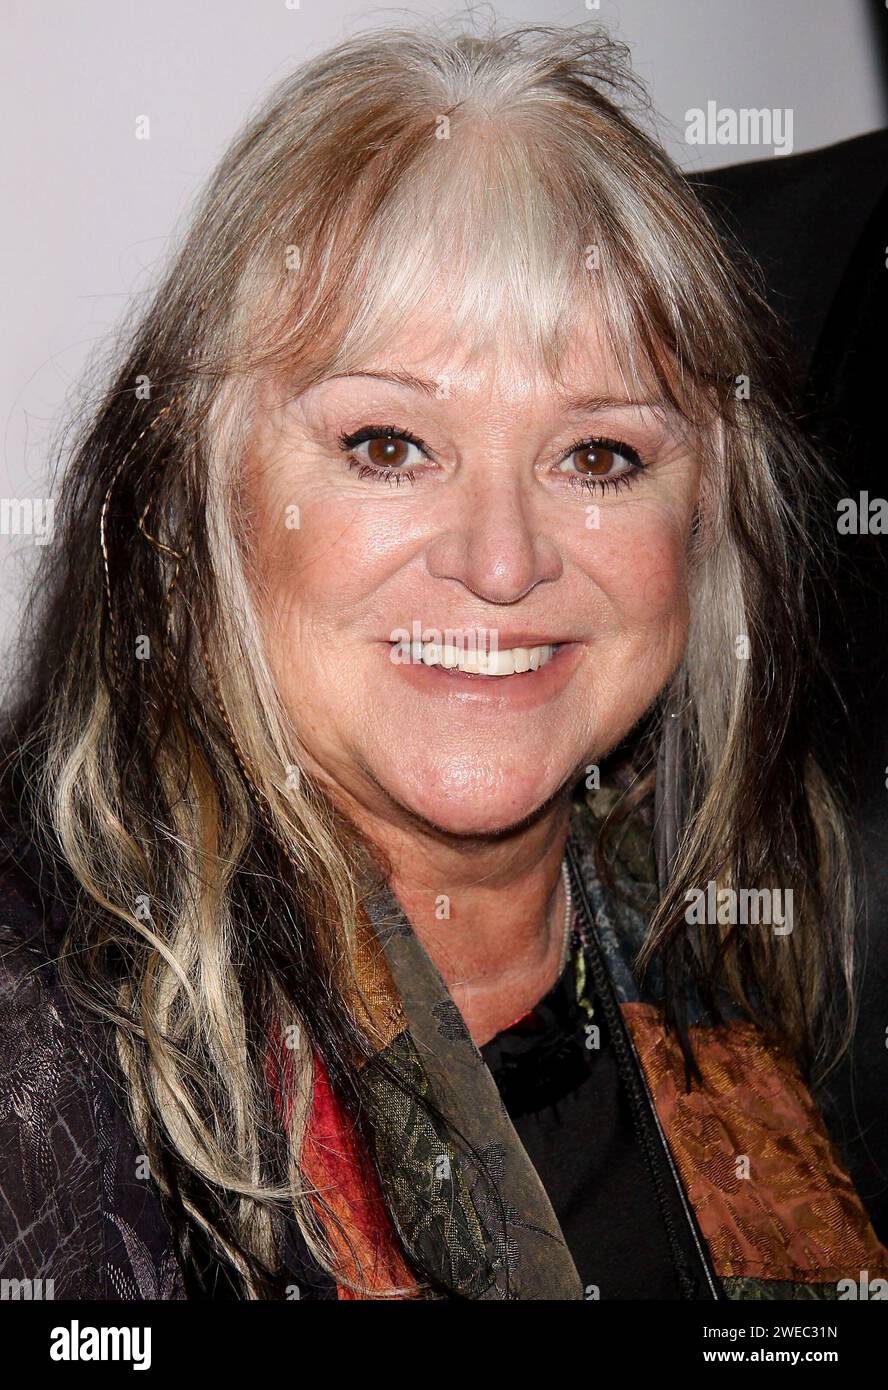 **FILE PHOTO** Melanie Has Passed Away. NEW YORK, NY- OCTOBER 7, 2013: Melanie Safka aka singer Melanie arrives for the Abingdon Theatre Company Honors, held at Espace on October 7, 2013 in New York City. Credit: Joseph Marzullo/MediaPunch Stock Photo